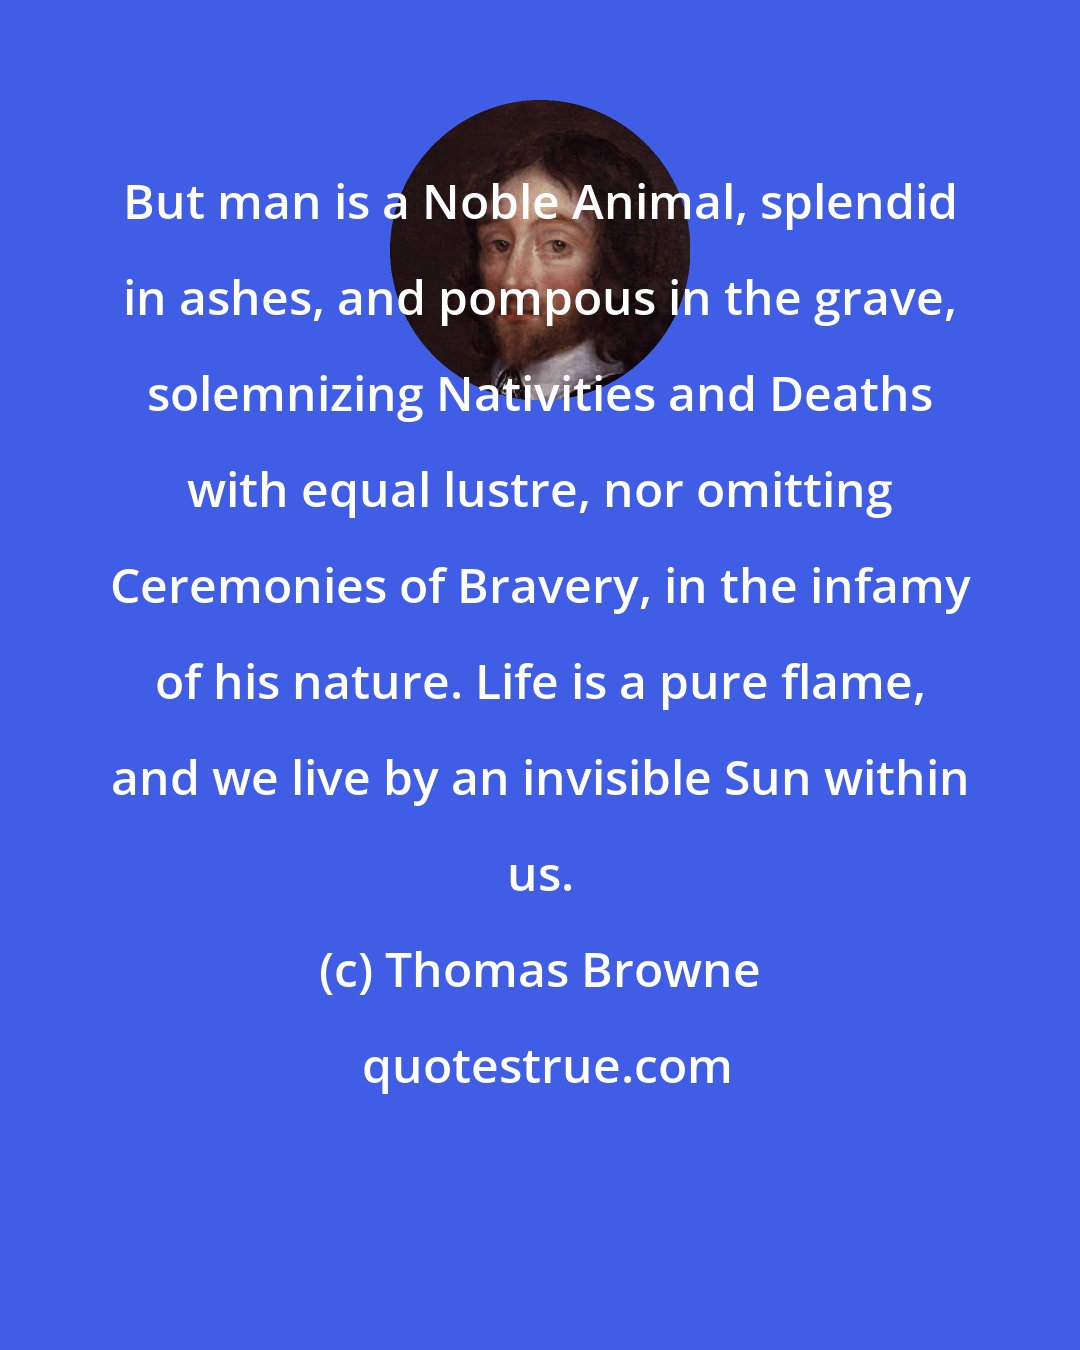 Thomas Browne: But man is a Noble Animal, splendid in ashes, and pompous in the grave, solemnizing Nativities and Deaths with equal lustre, nor omitting Ceremonies of Bravery, in the infamy of his nature. Life is a pure flame, and we live by an invisible Sun within us.